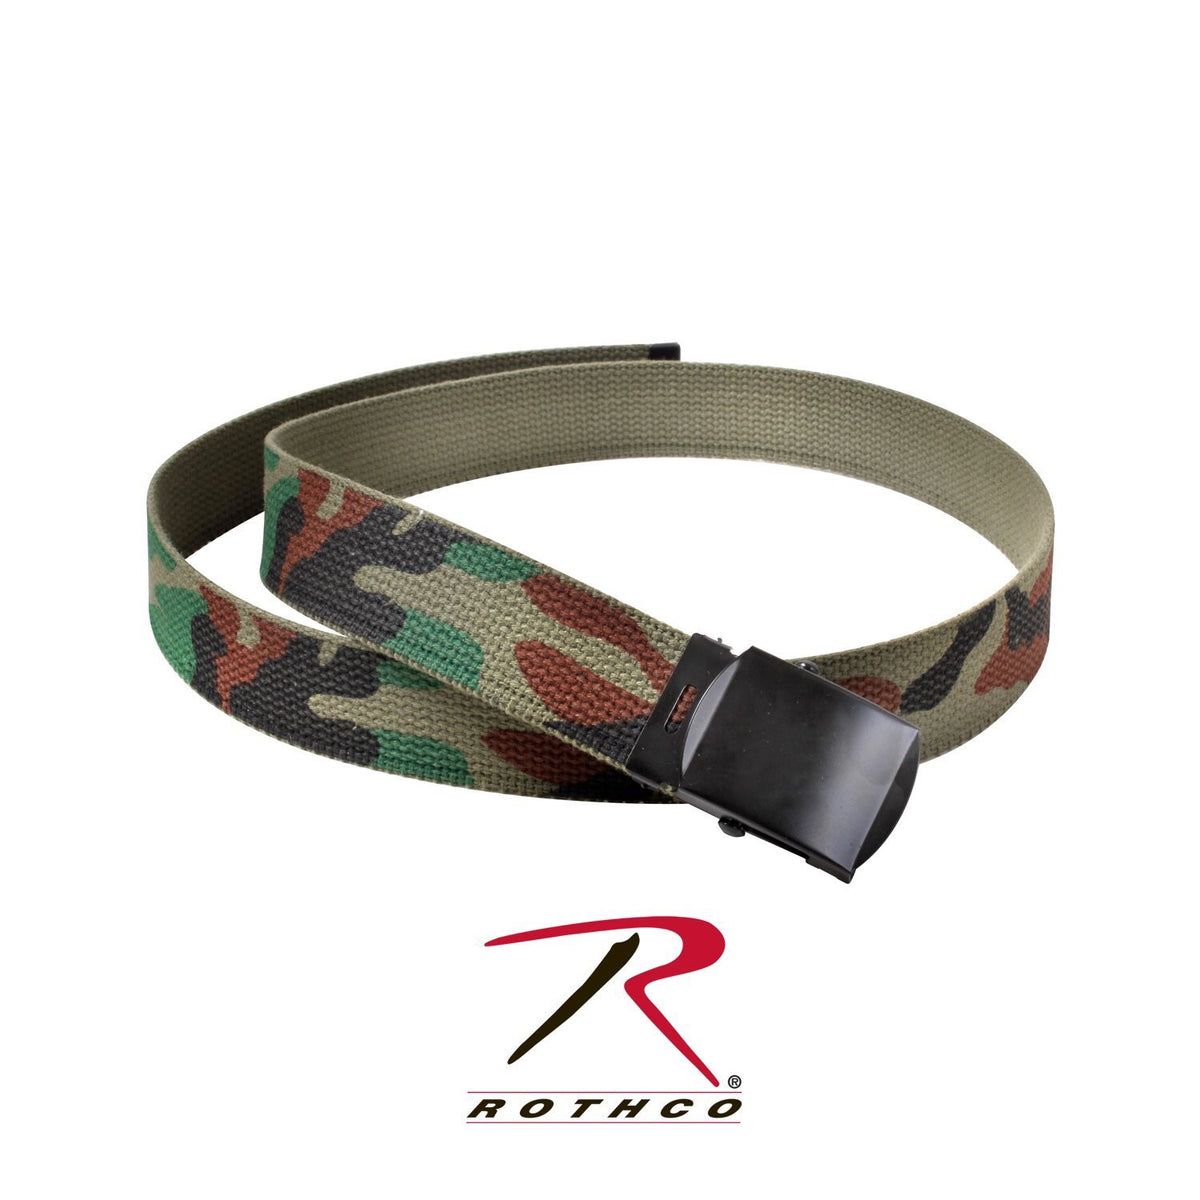 Rothco reversible camo belt 44 Inch